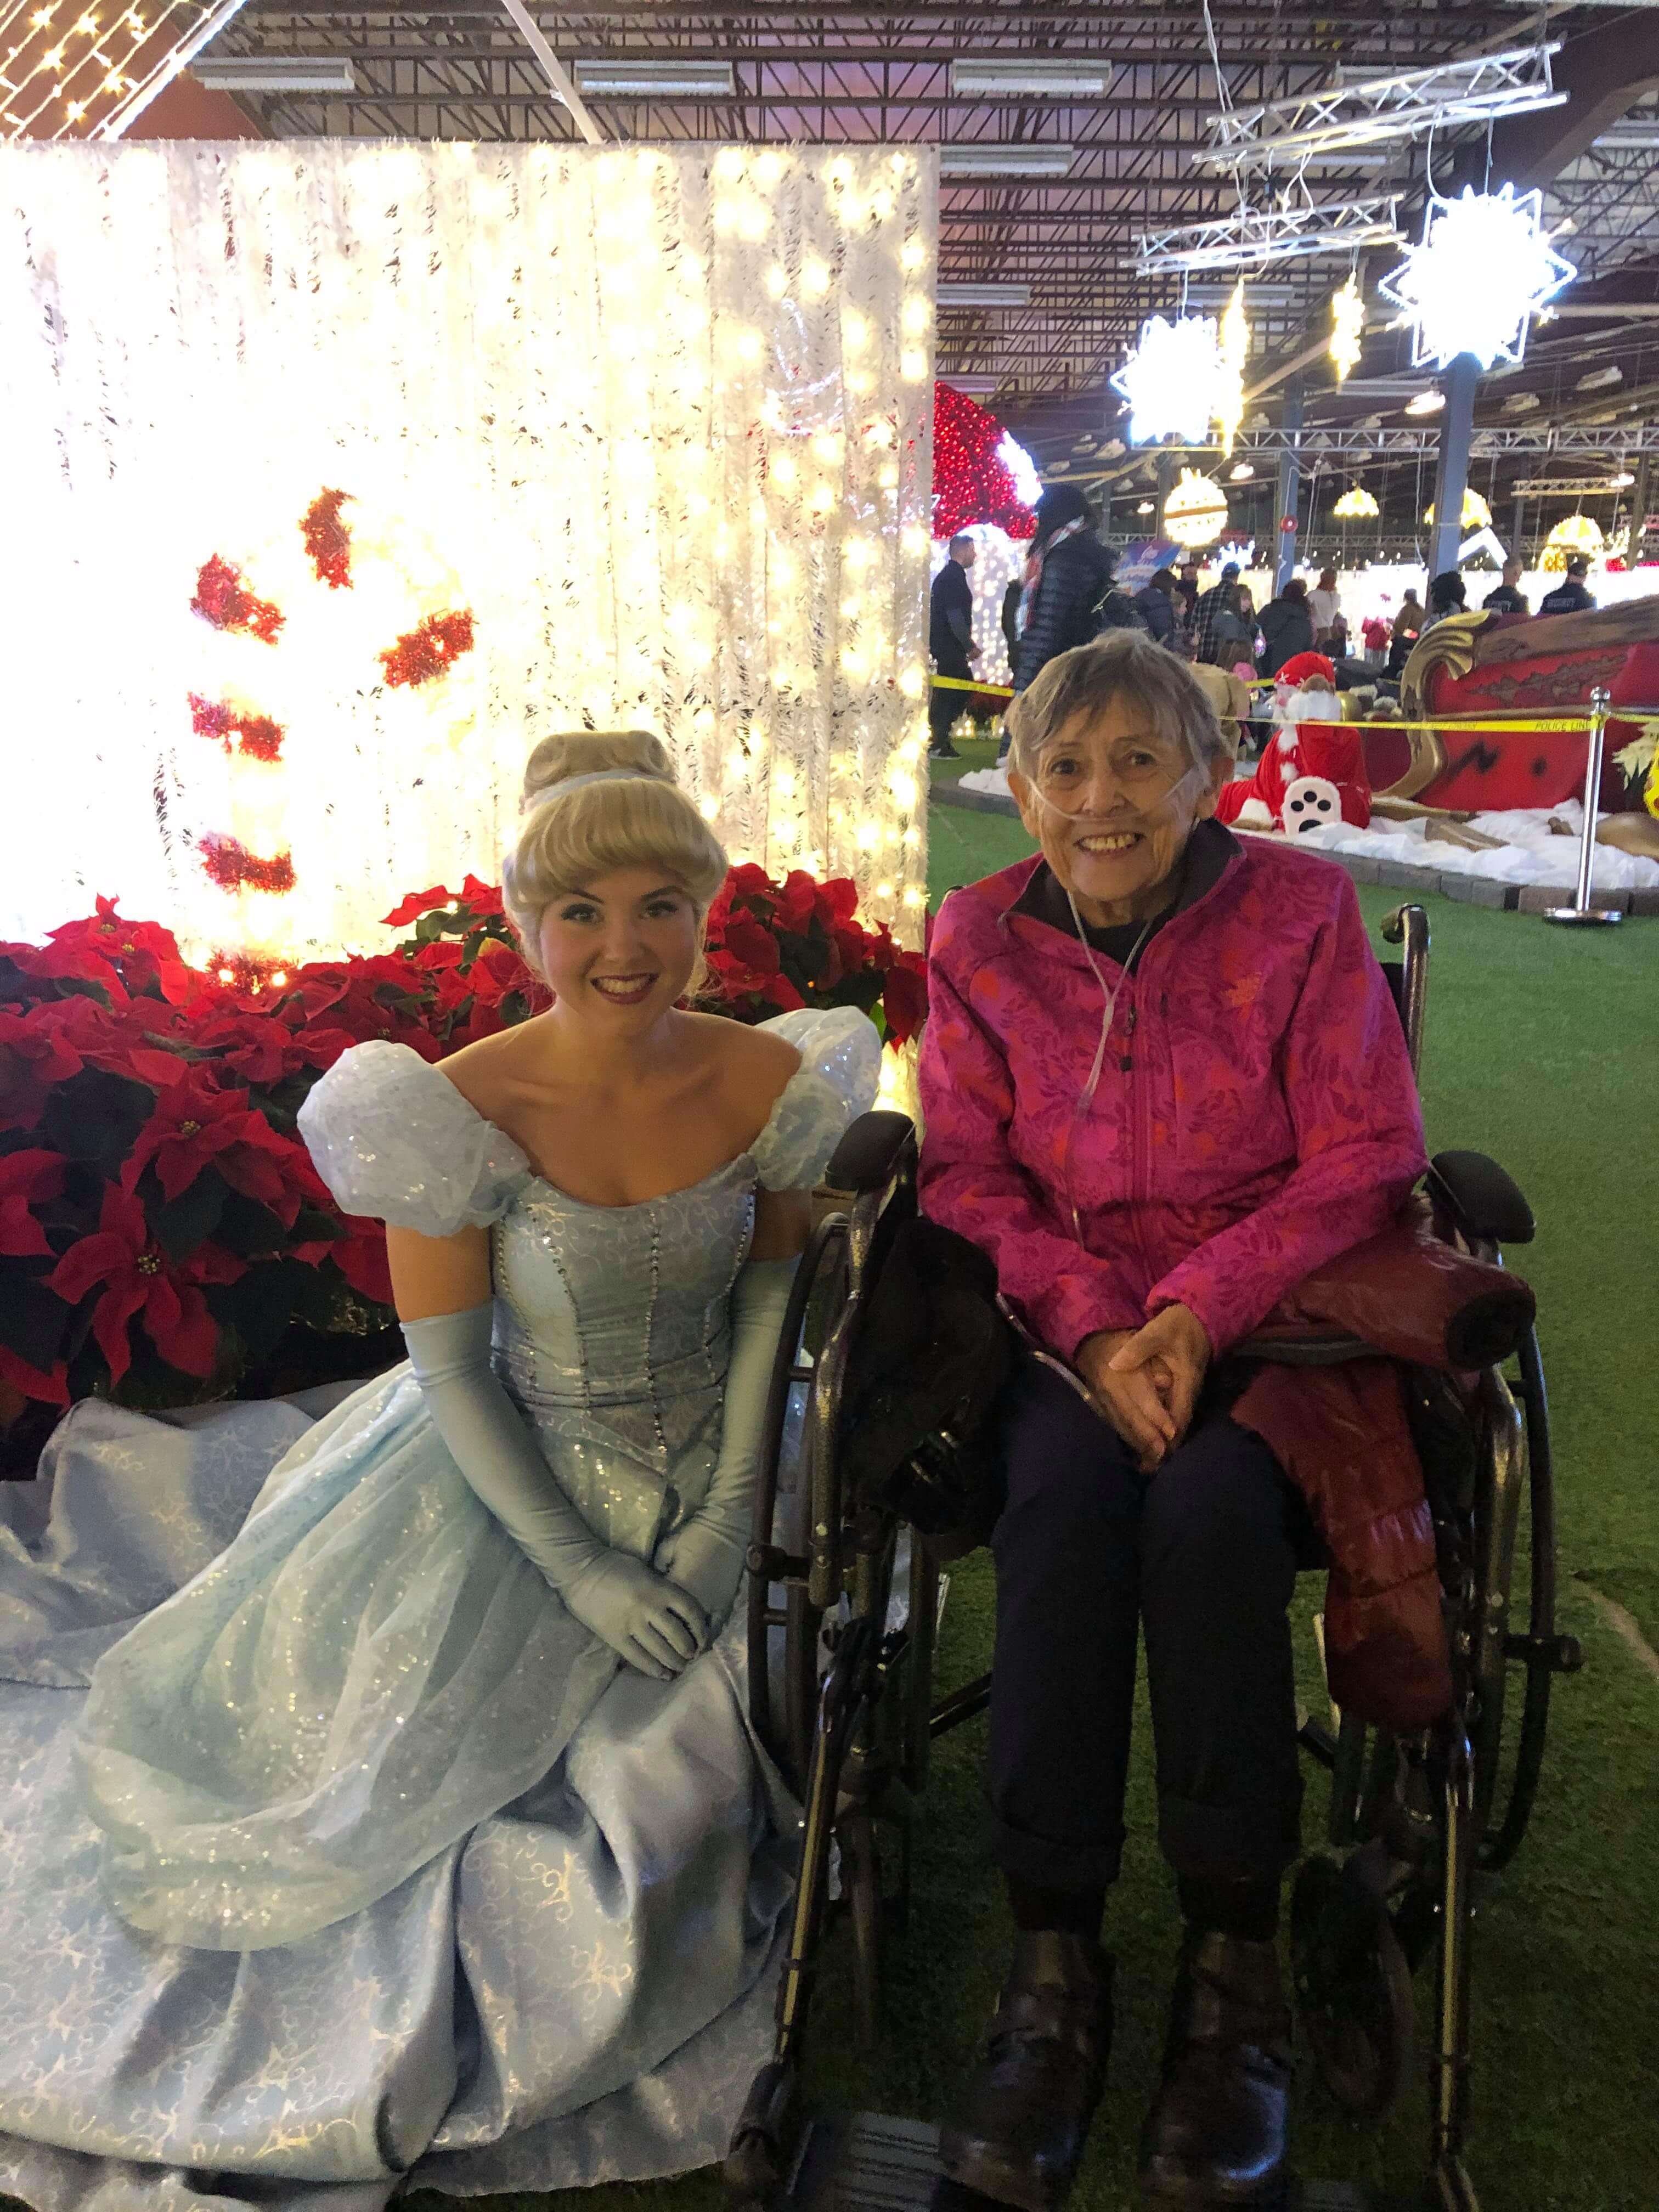 Sally smiling with Cinderella at Glow Park